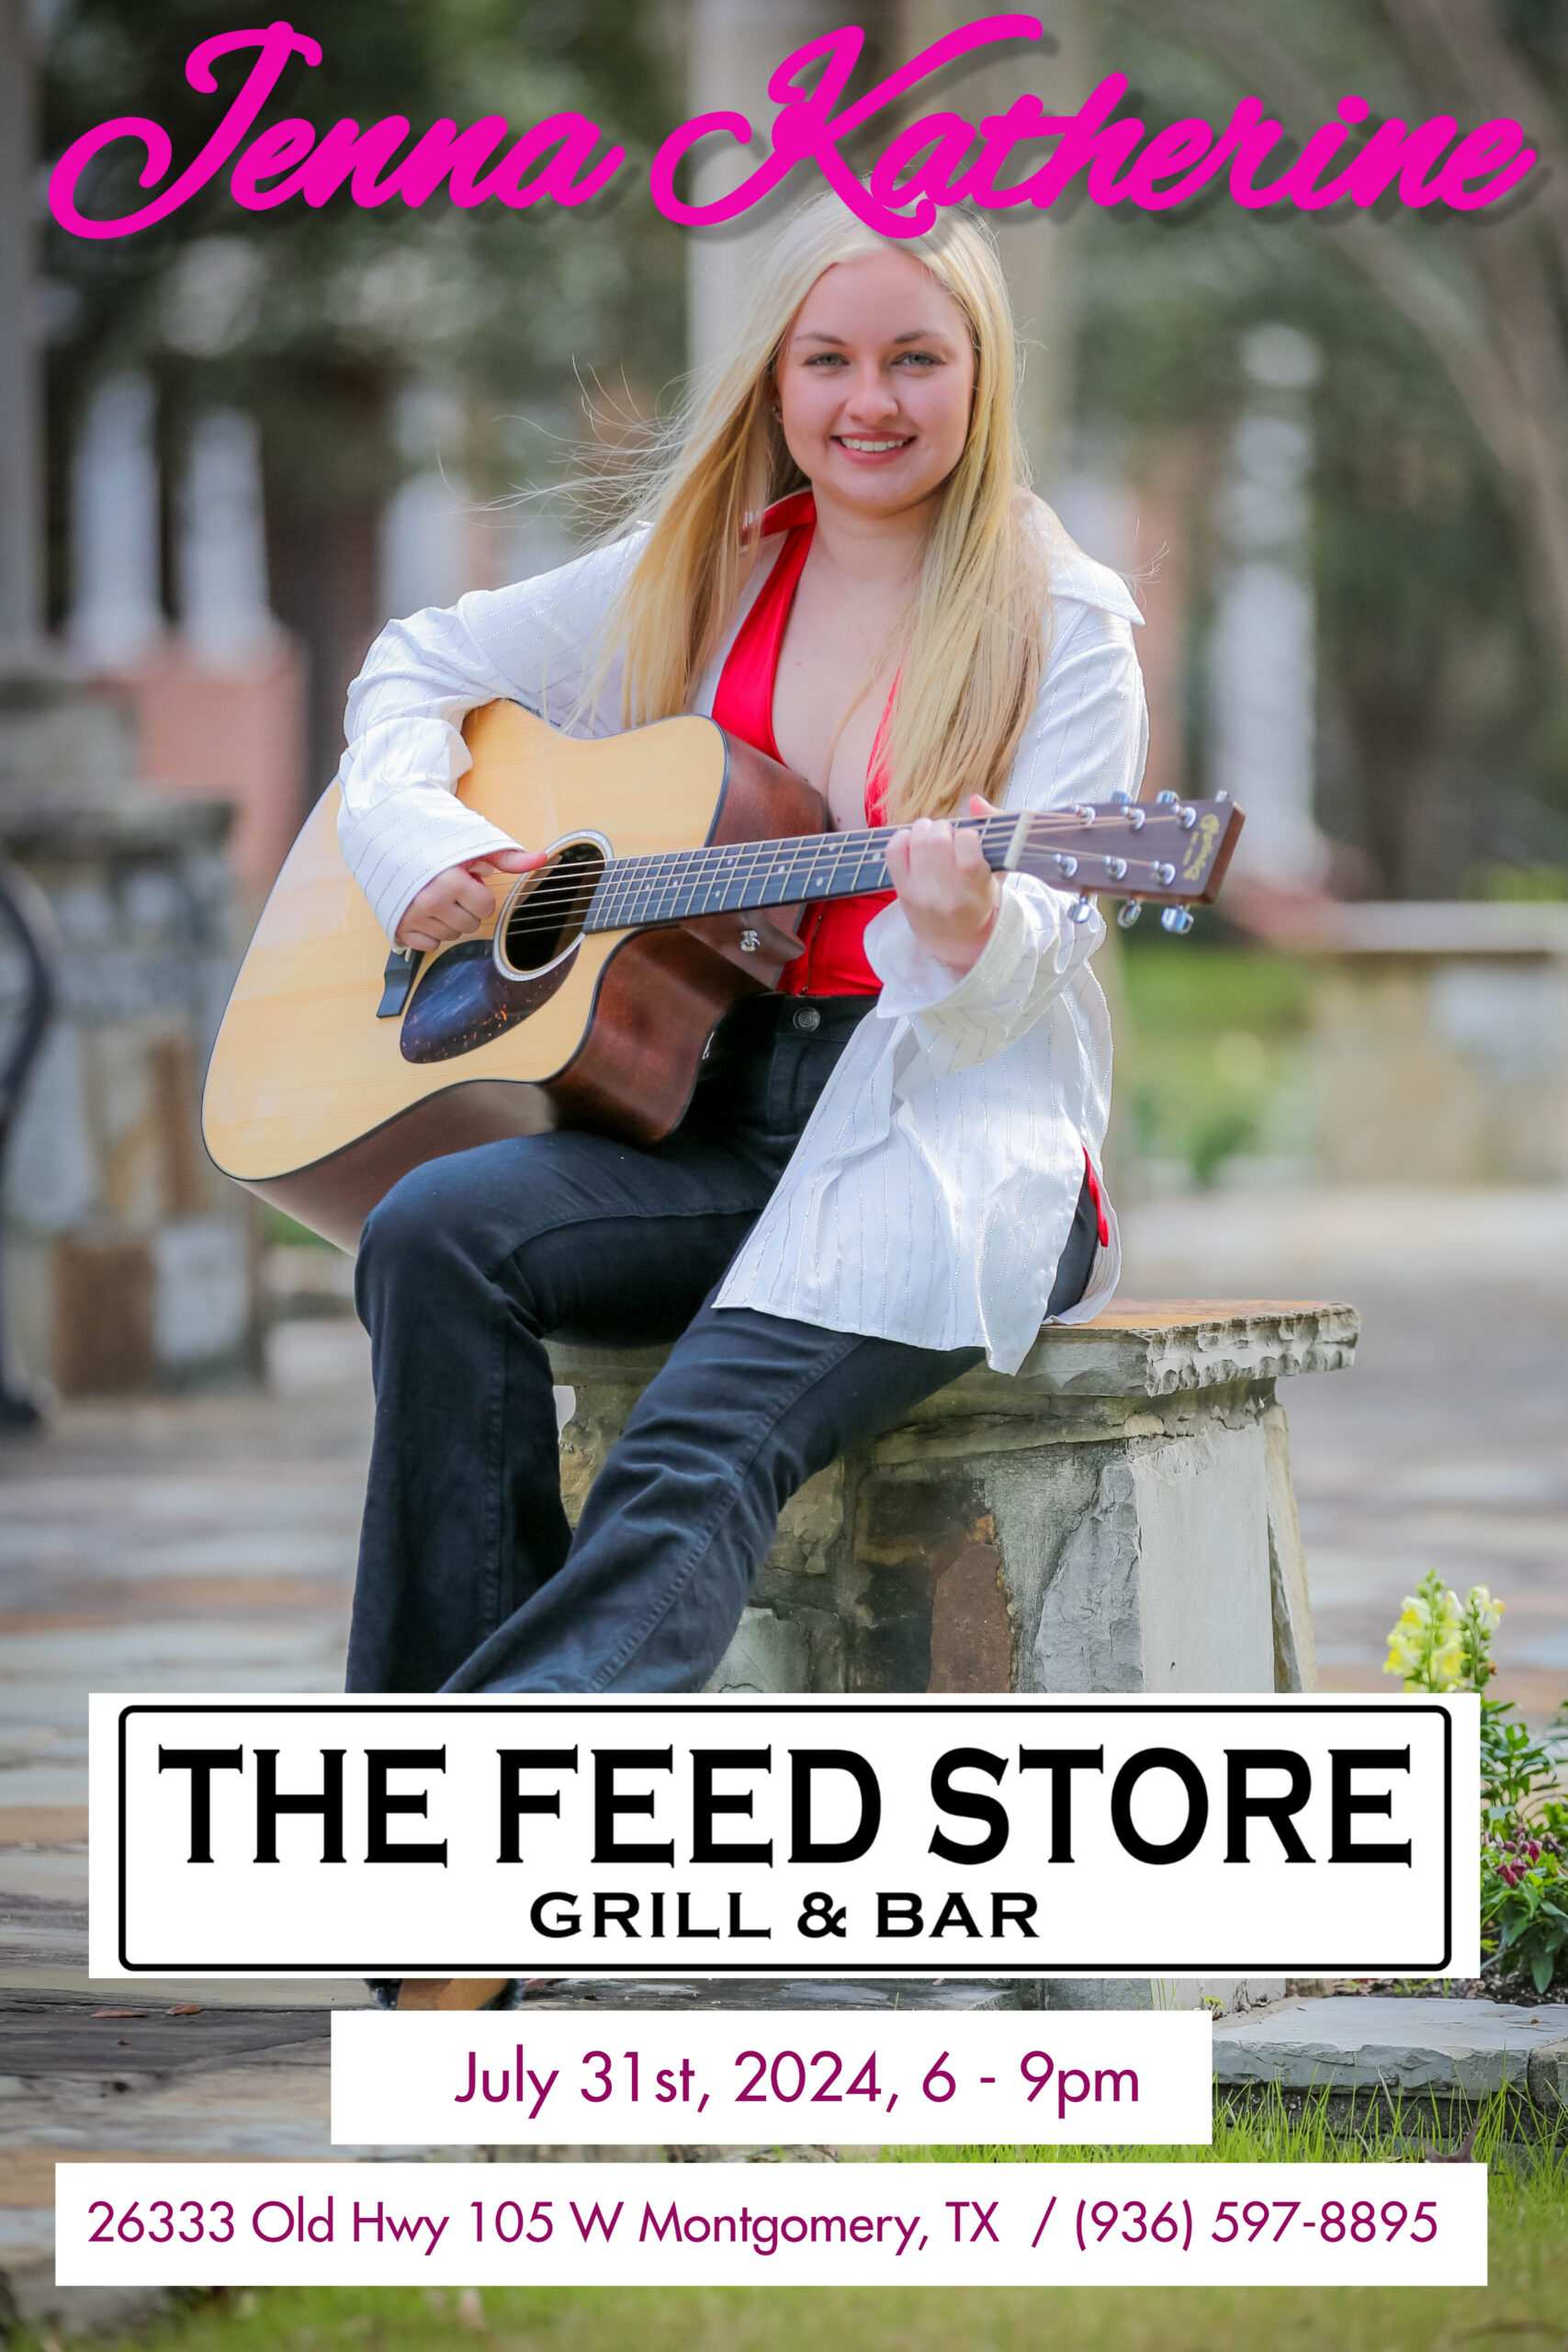 Jenna Katherine @ The Feed Store Grill & Bar